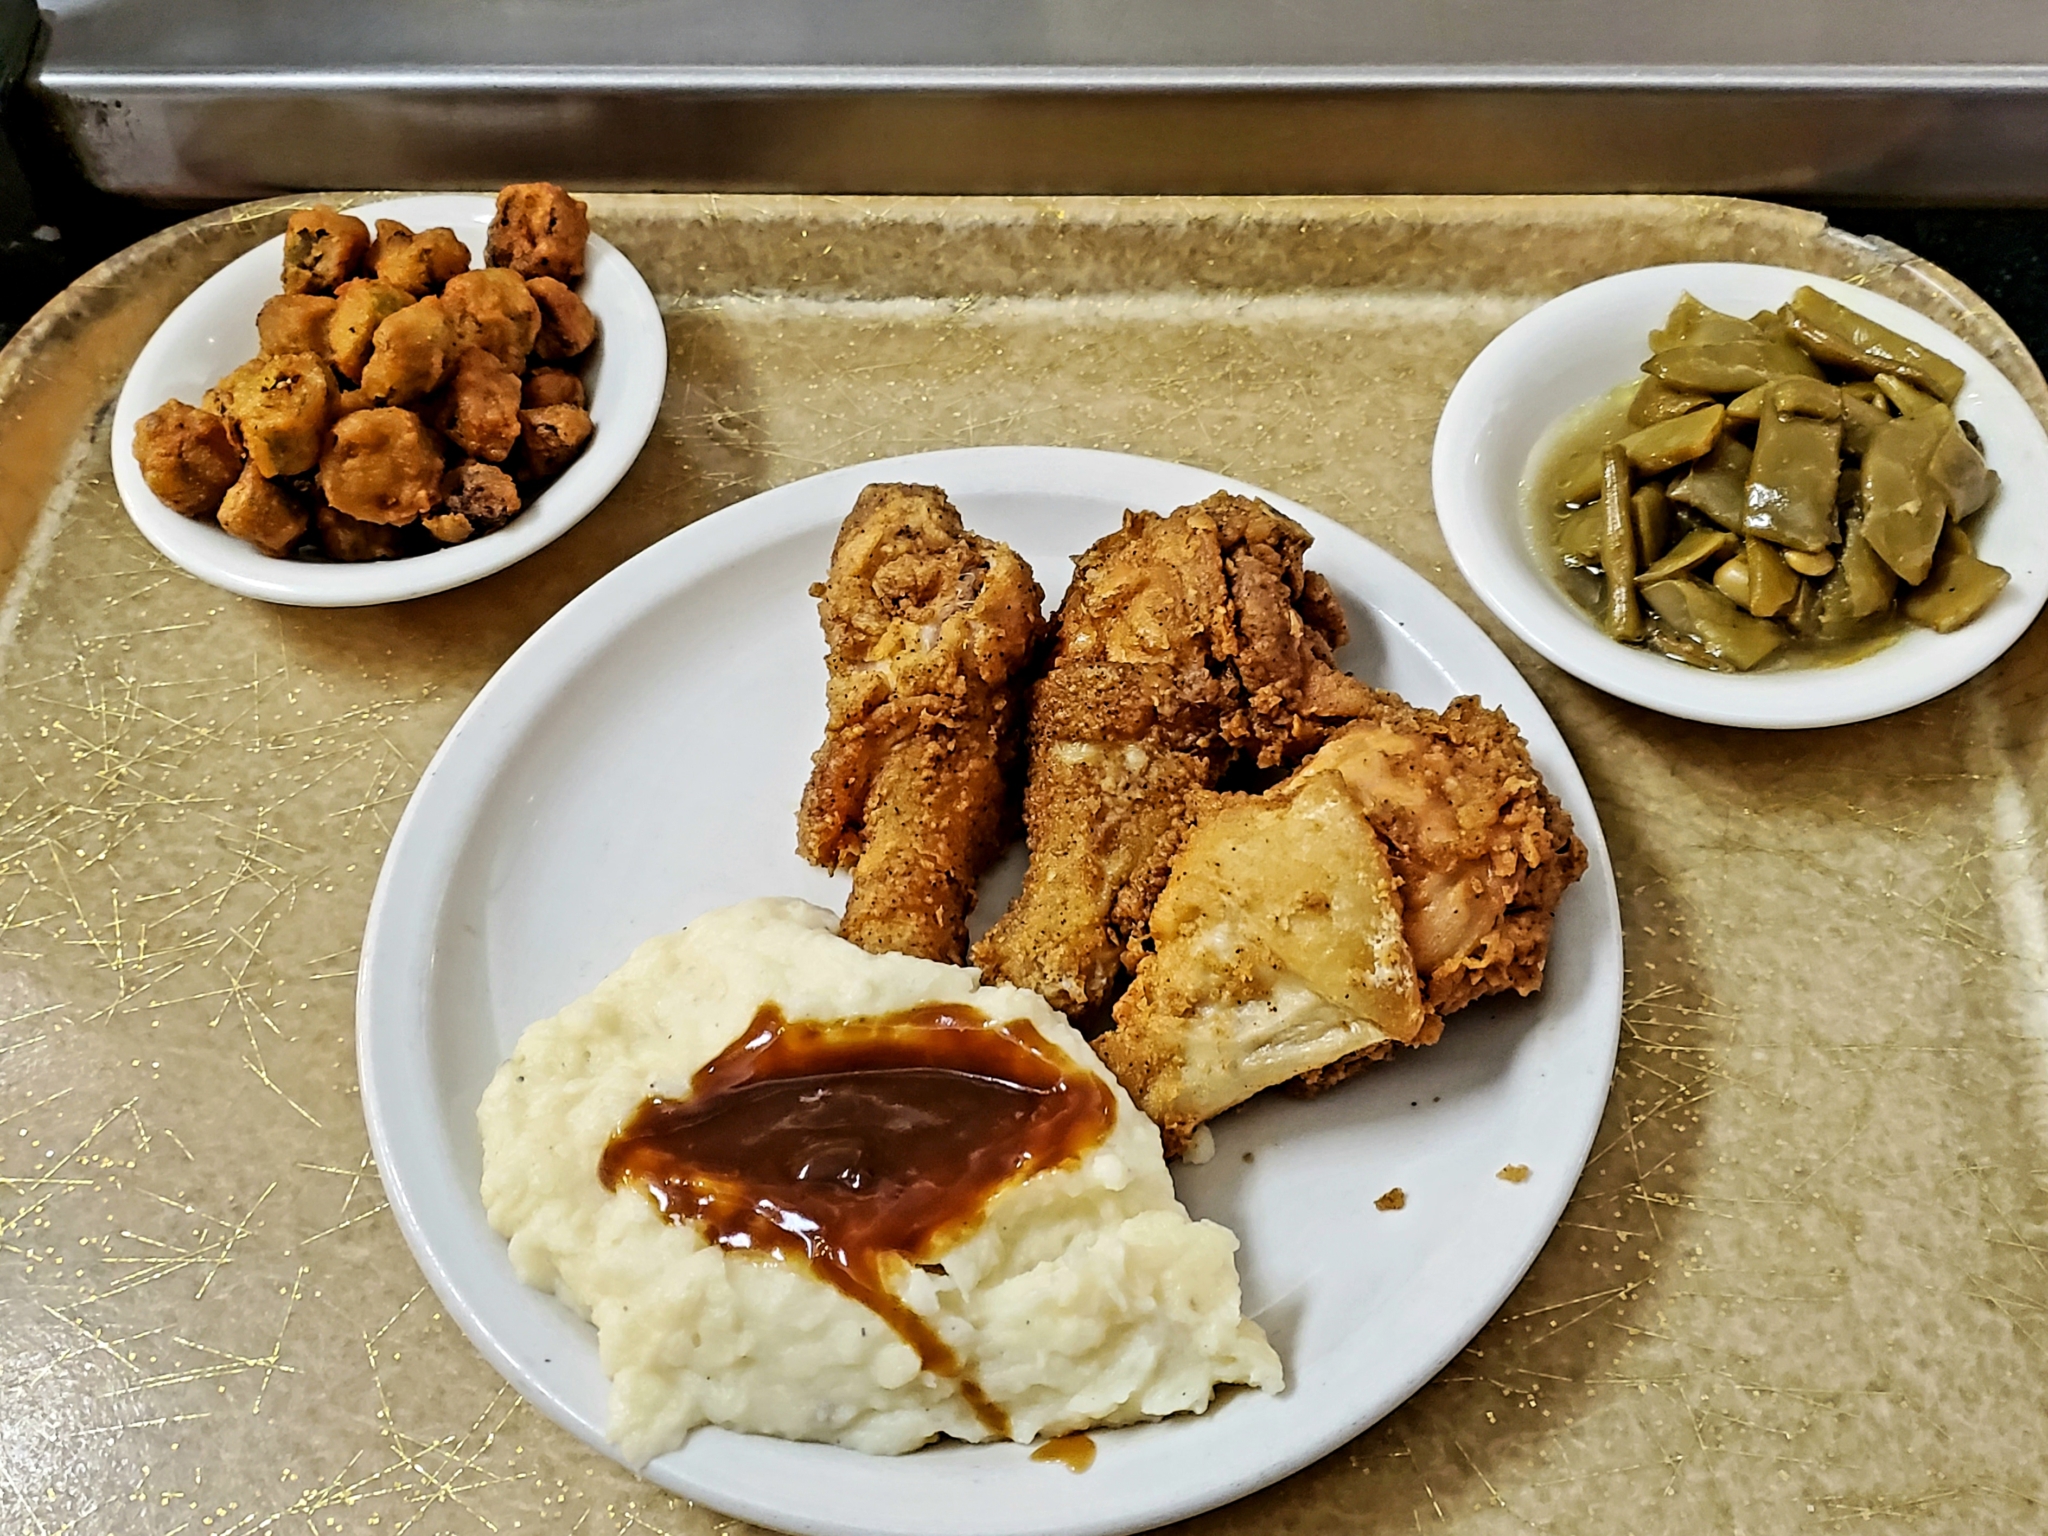 A meal from Paw Paw Patch on Green Springs Highway